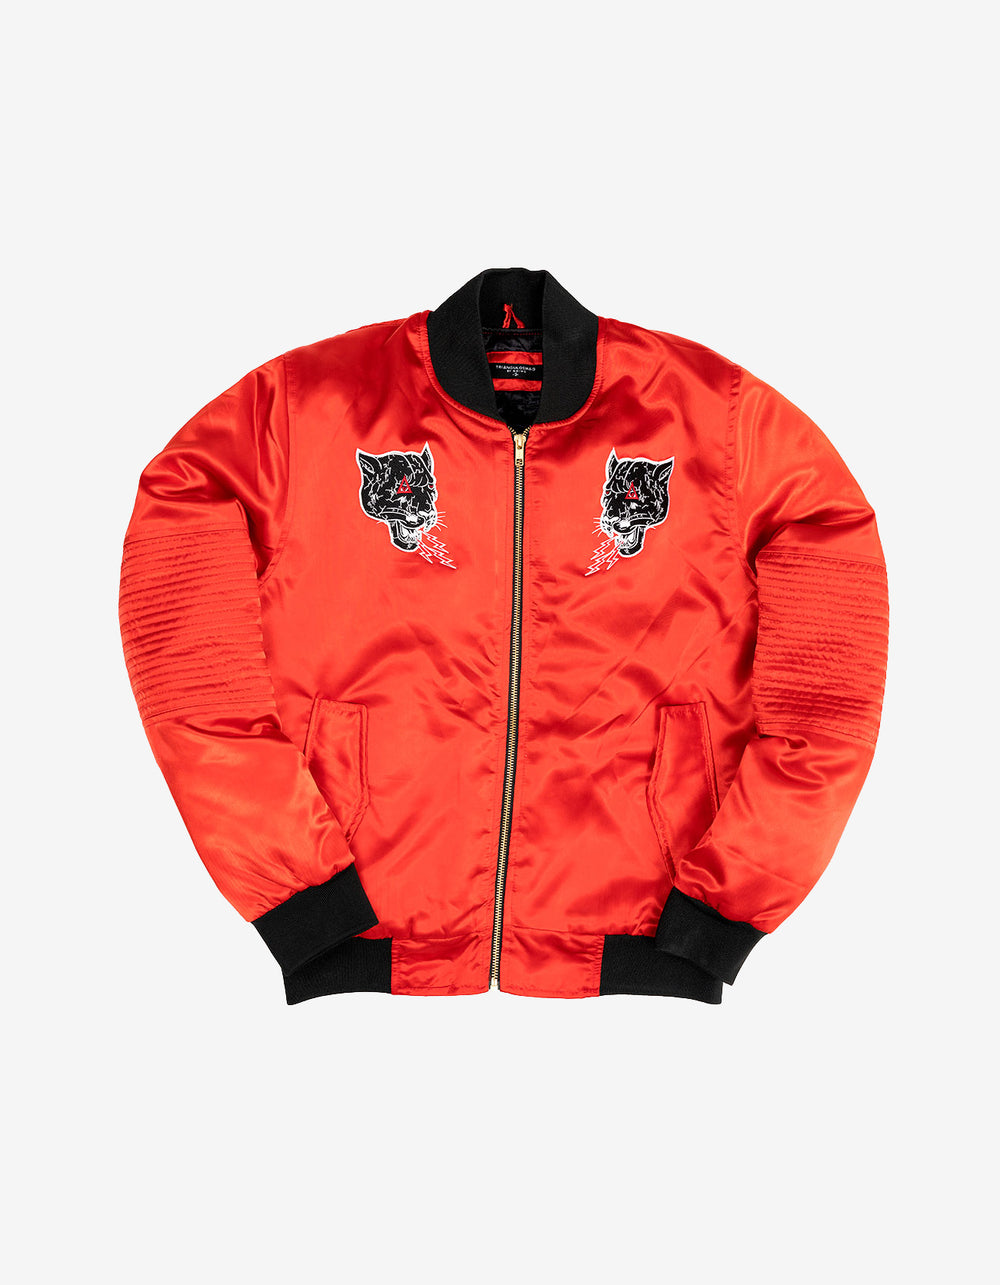 PANTHER RED LIMITED EDITION JACKET - Triangulo Swag